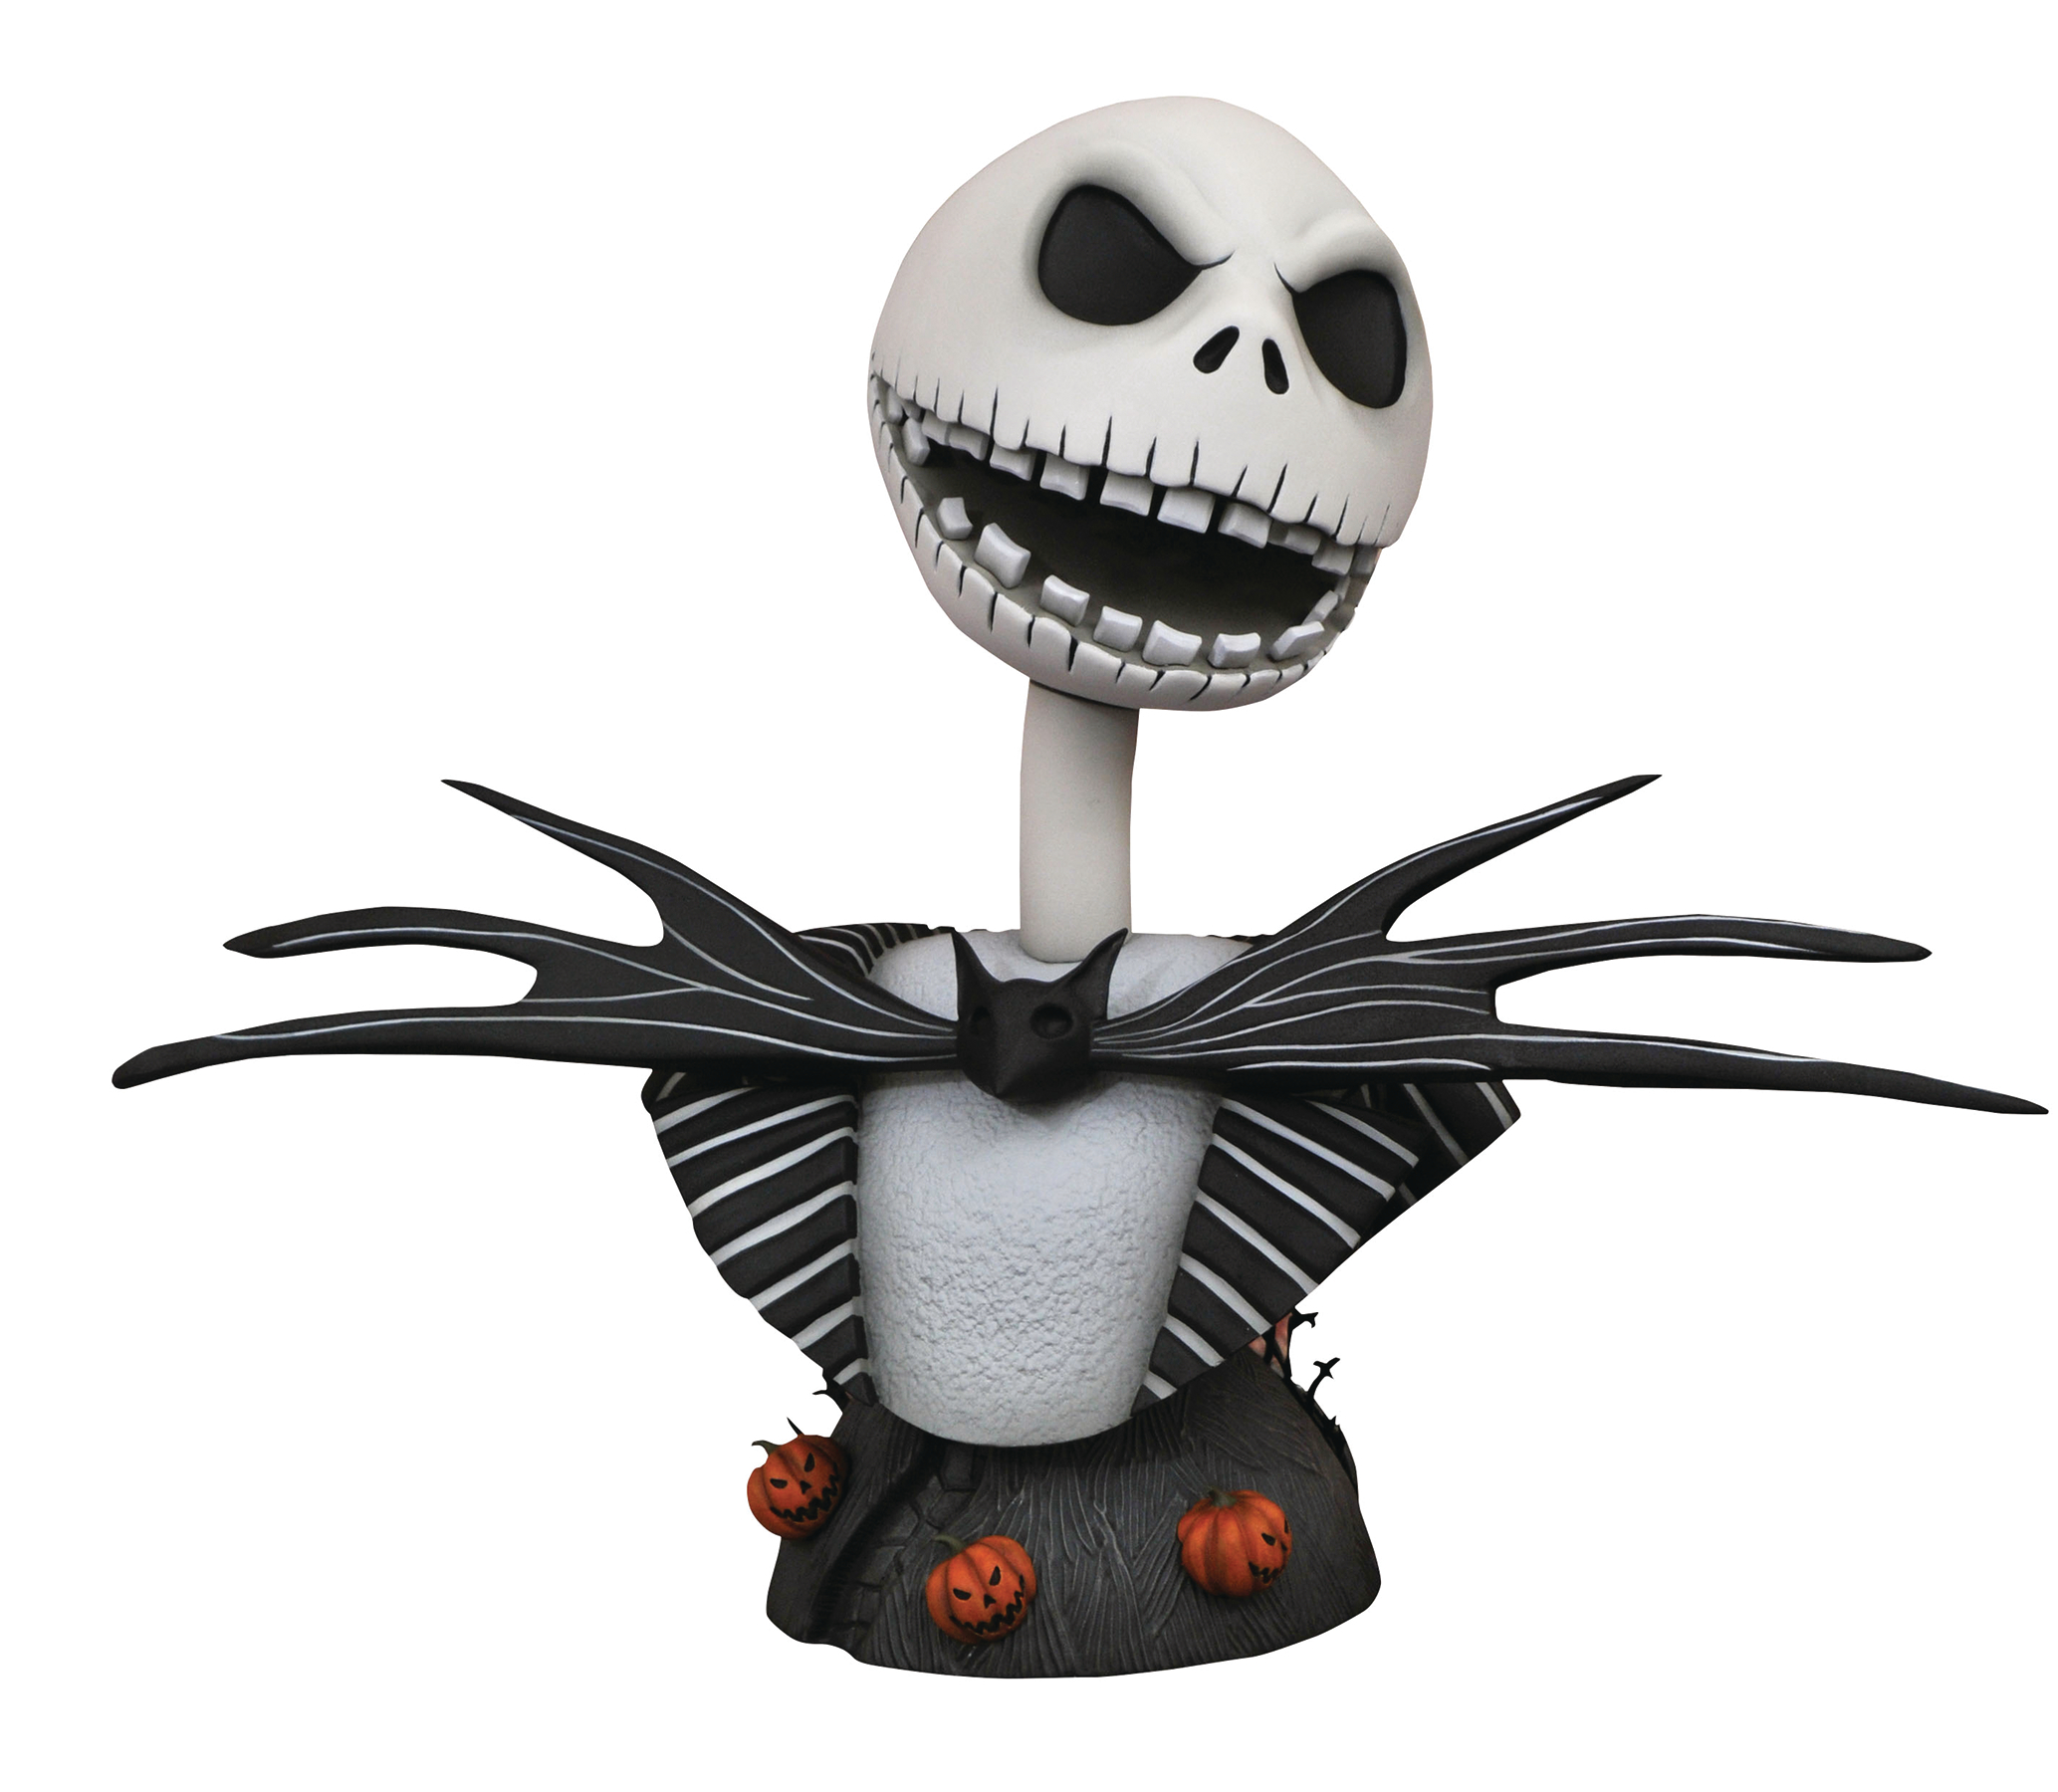 LEGENDS IN 3D MOVIE NBX JACK SKELLINGTON 1/2 SCALE BUST (O/A